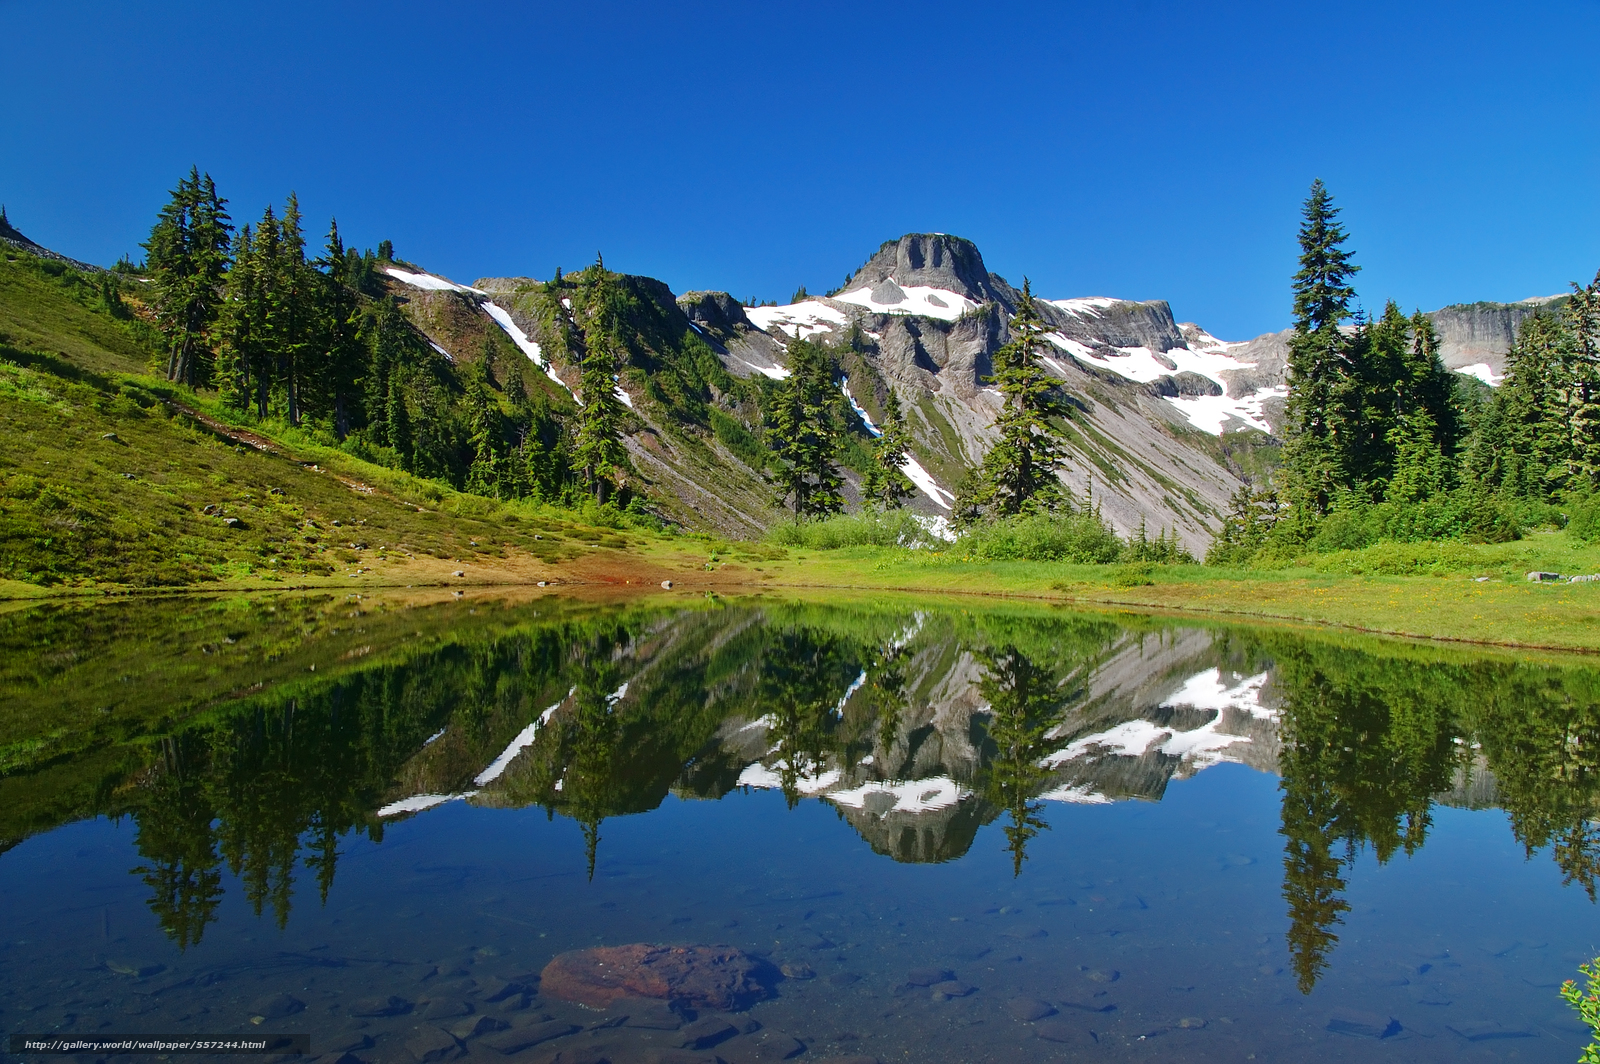 Download wallpaper lake in the North Cascades Washington State